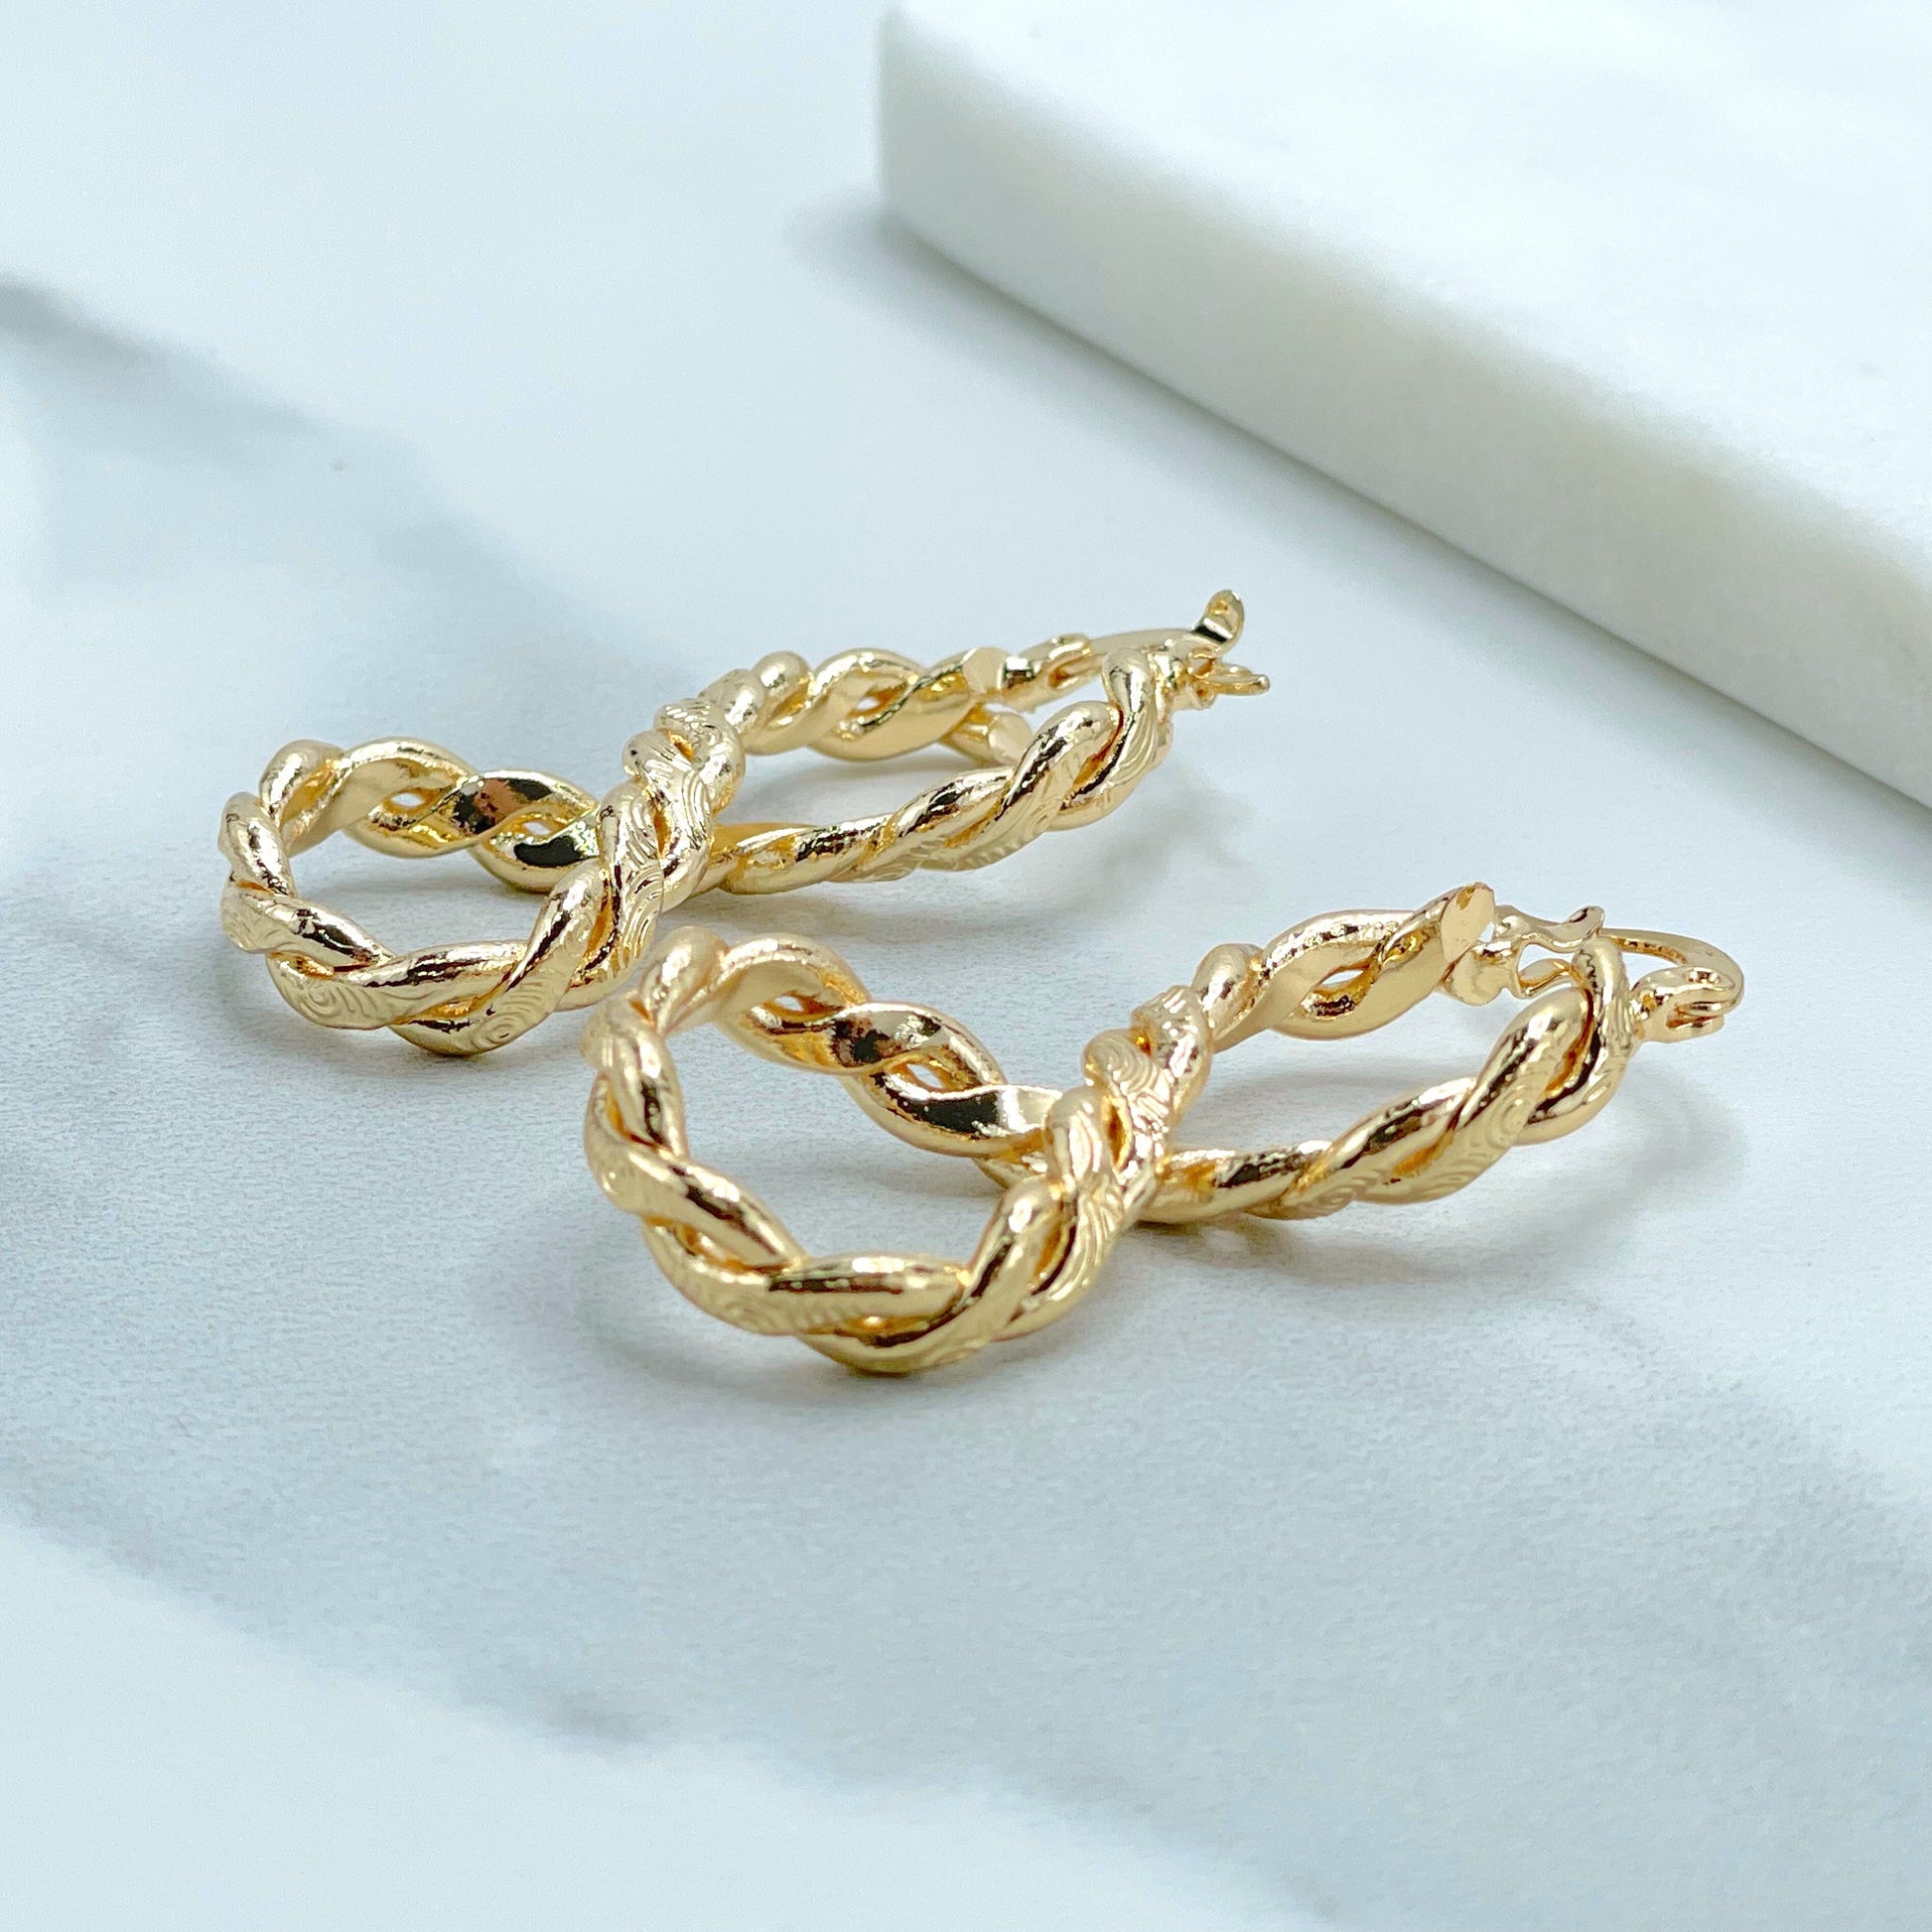 18k Gold Filled 40mm Textured Infinity Twisted Dangle Earrings, 4mm Thickness, Wholesale Jewelry Making Supplies